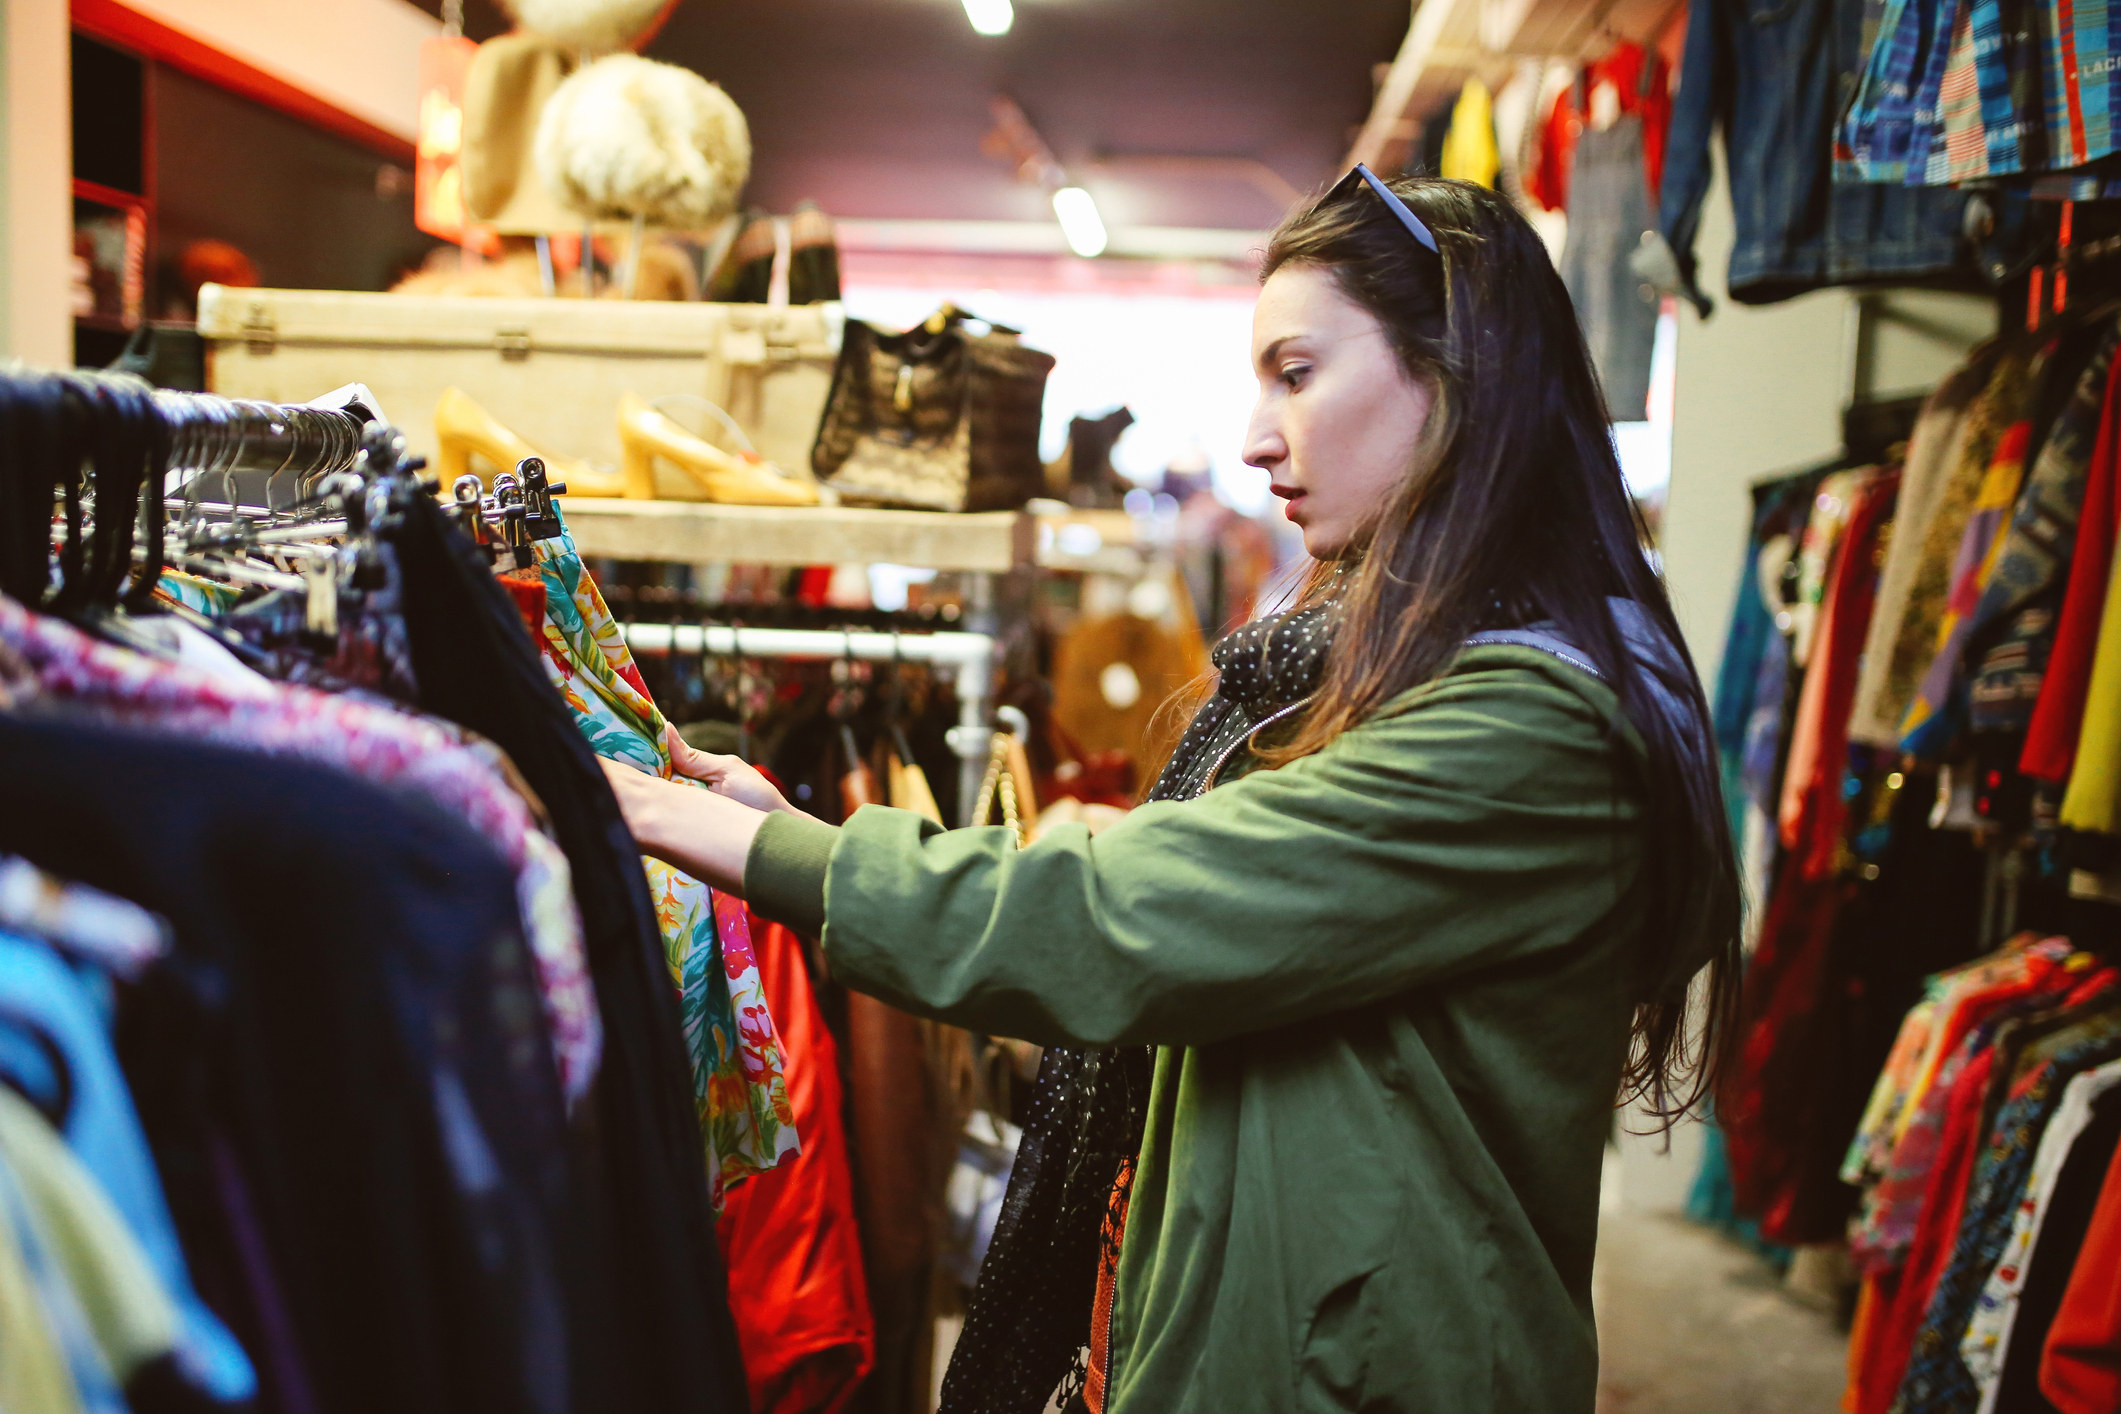 A woman shopping at a thrift store